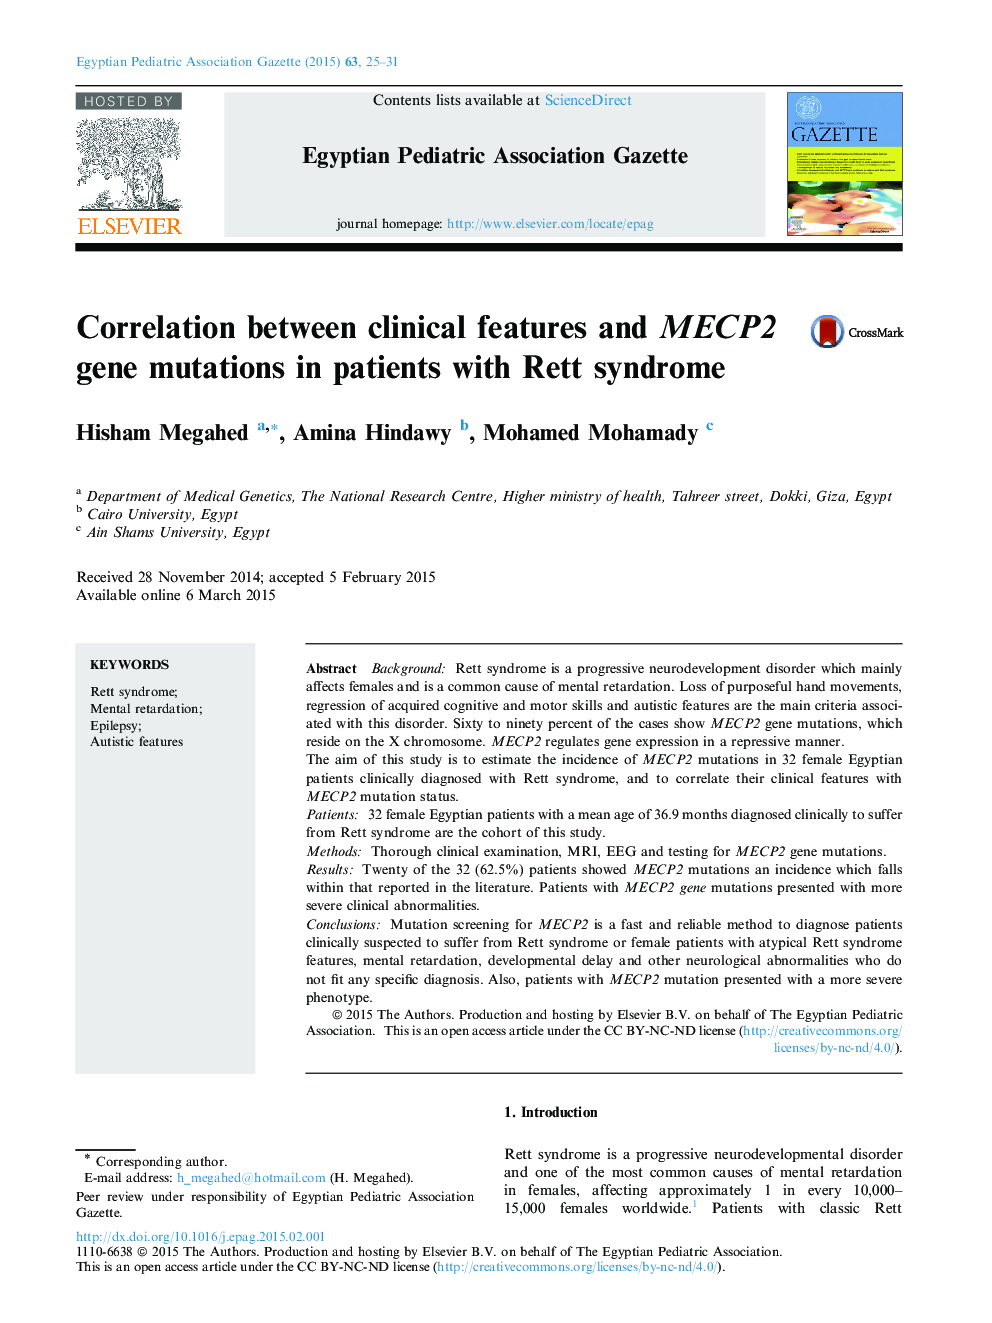 Correlation between clinical features and MECP2 gene mutations in patients with Rett syndrome 